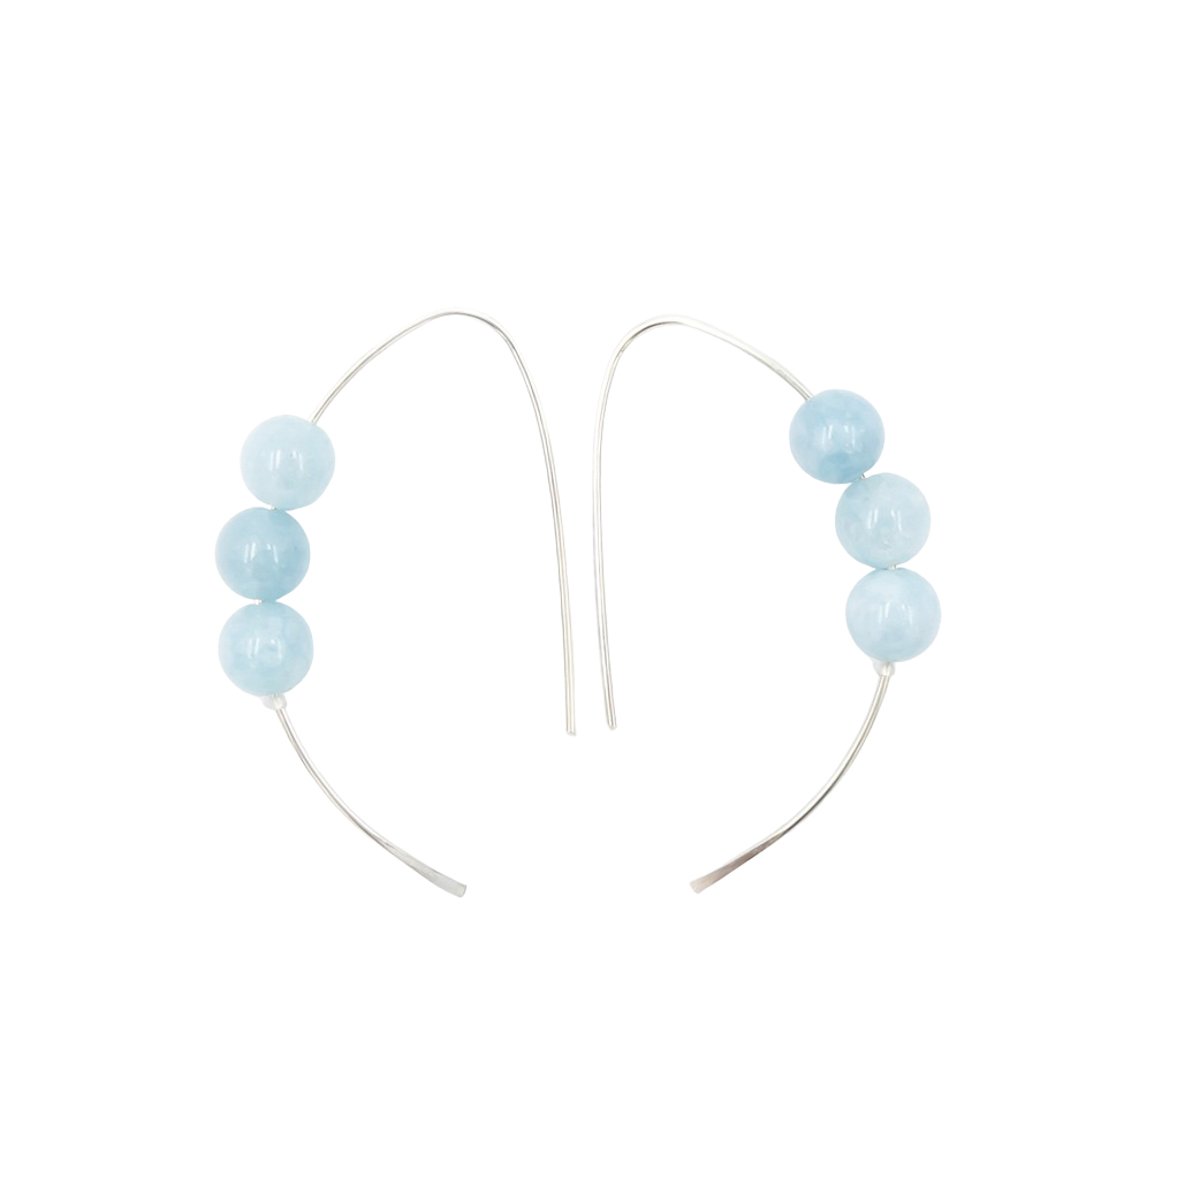 Earth Song Jewelry - Handmade aquamarine sterling silver curves earrings